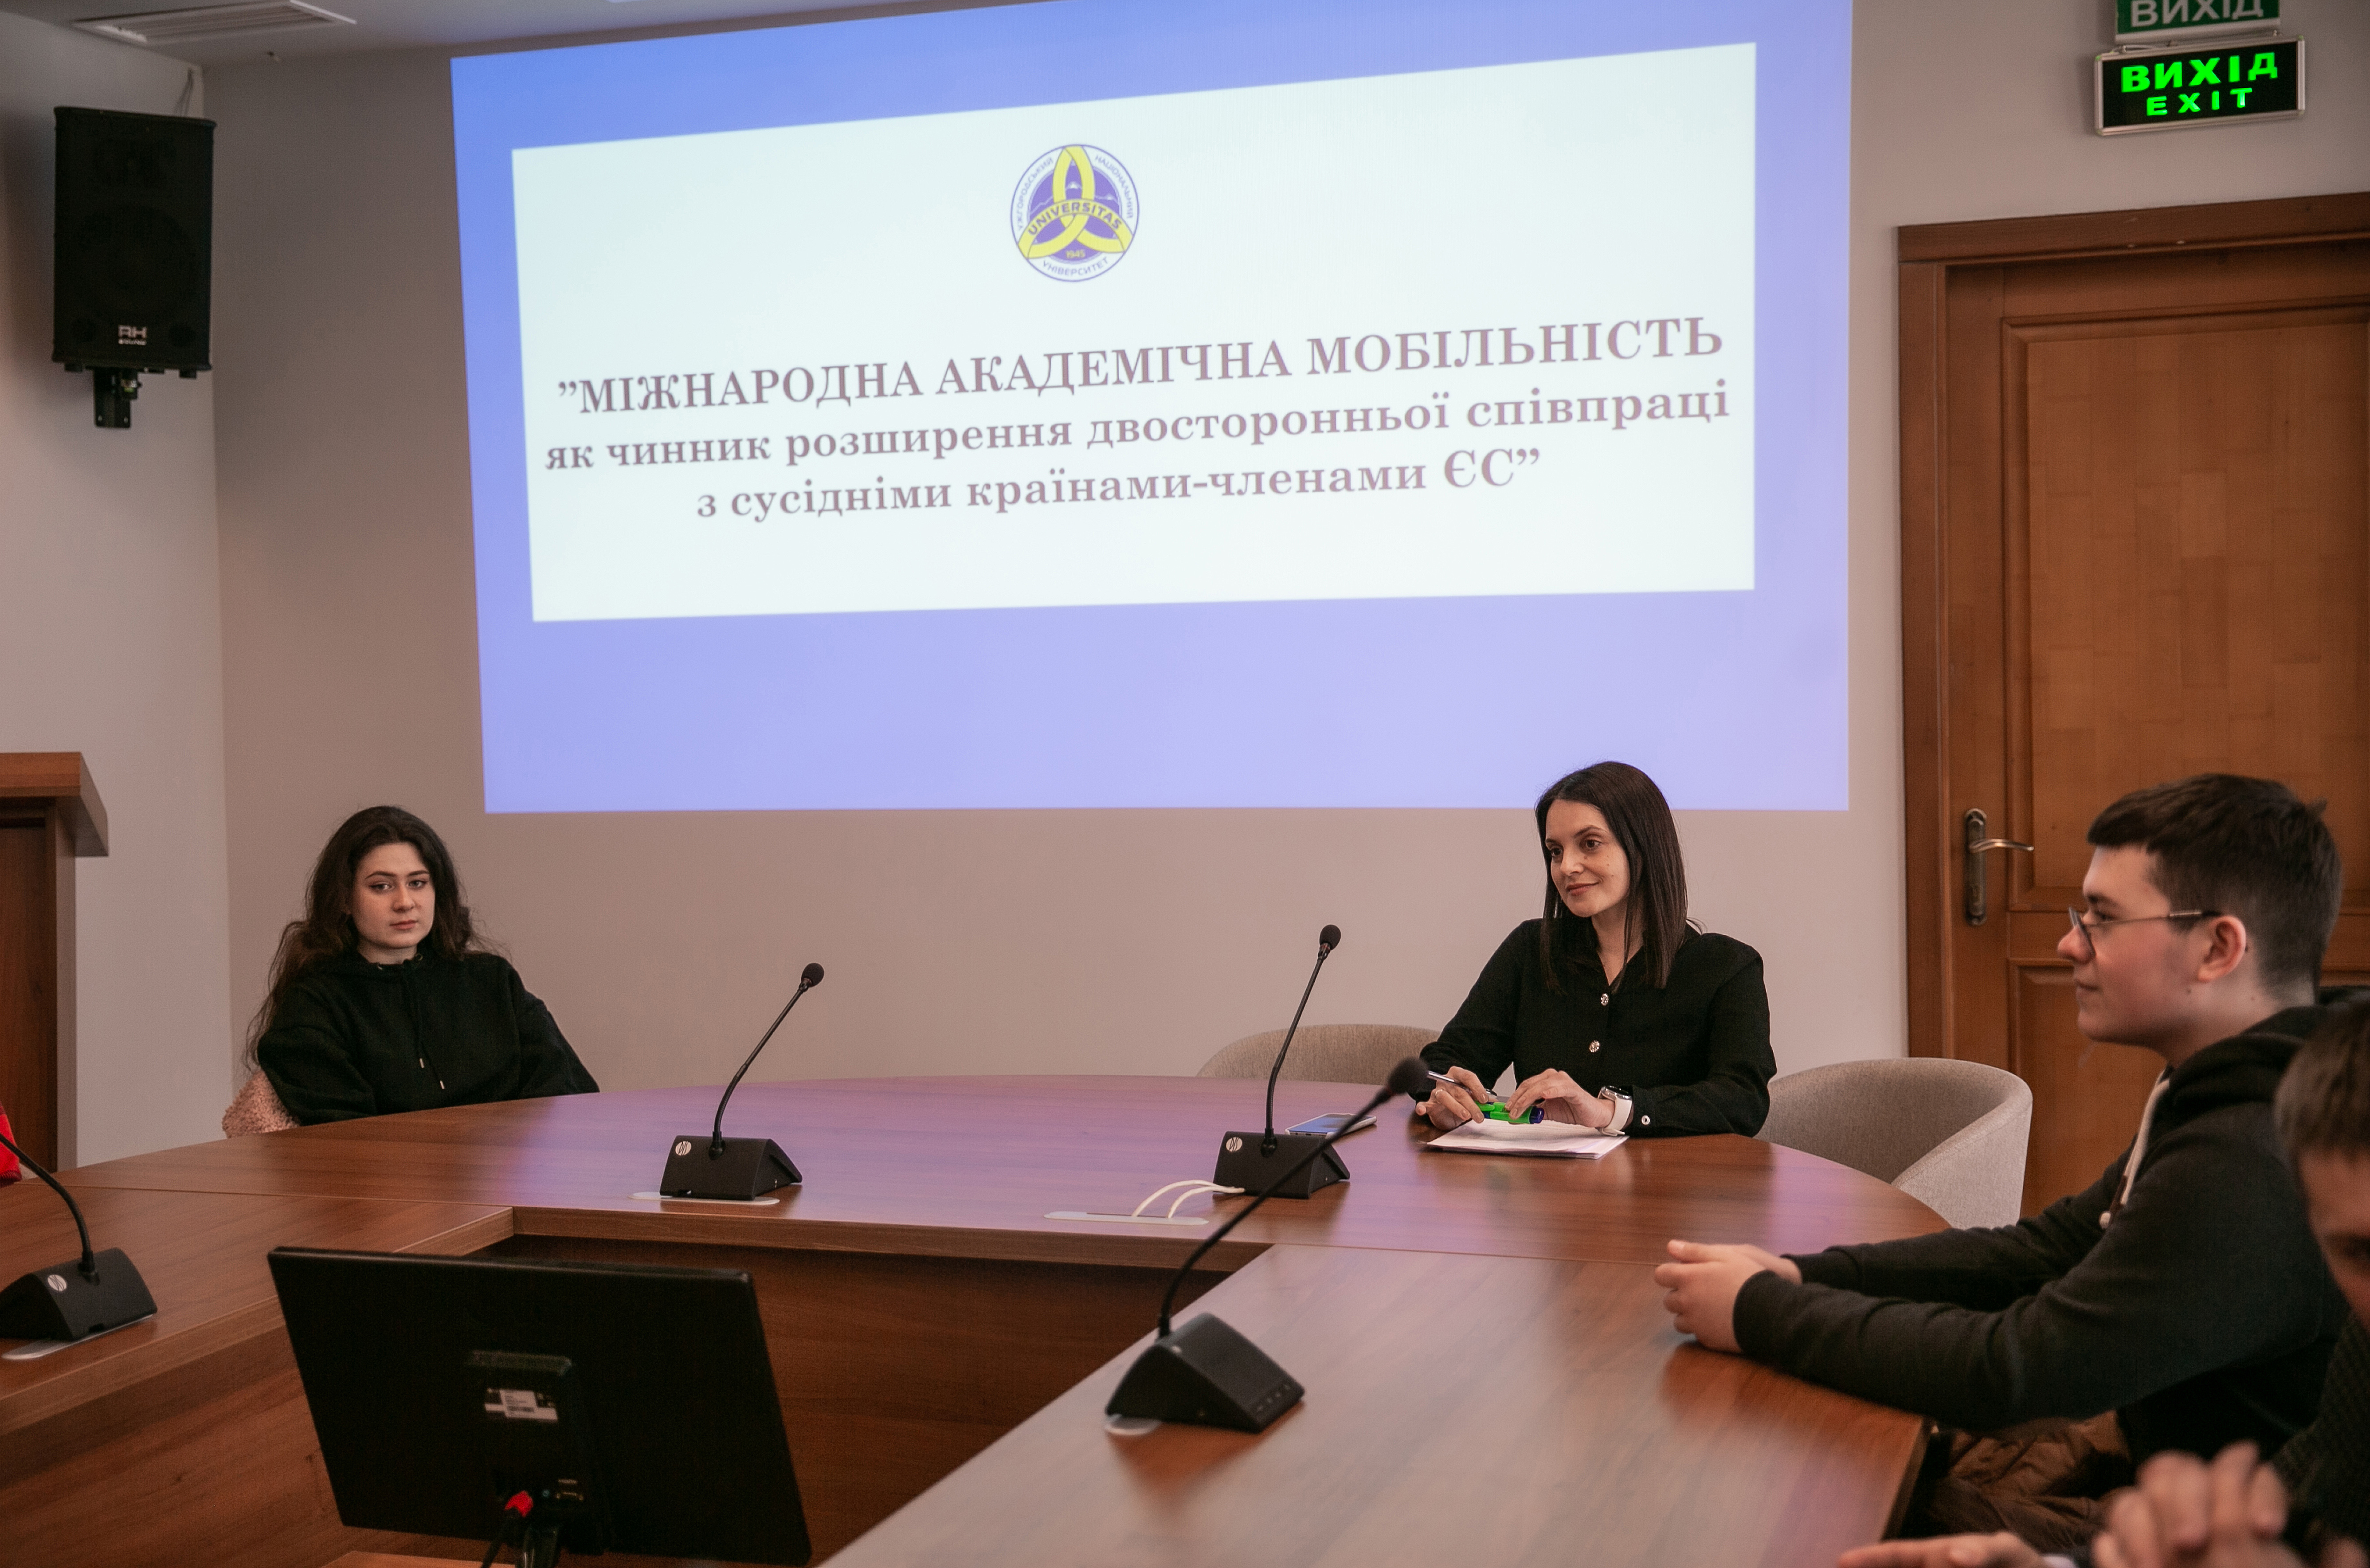 The webinar ‘International Academic Mobility of Students as a Factor in Expanding Bilateral Cooperation with Neighboring EU Member States’ was held 